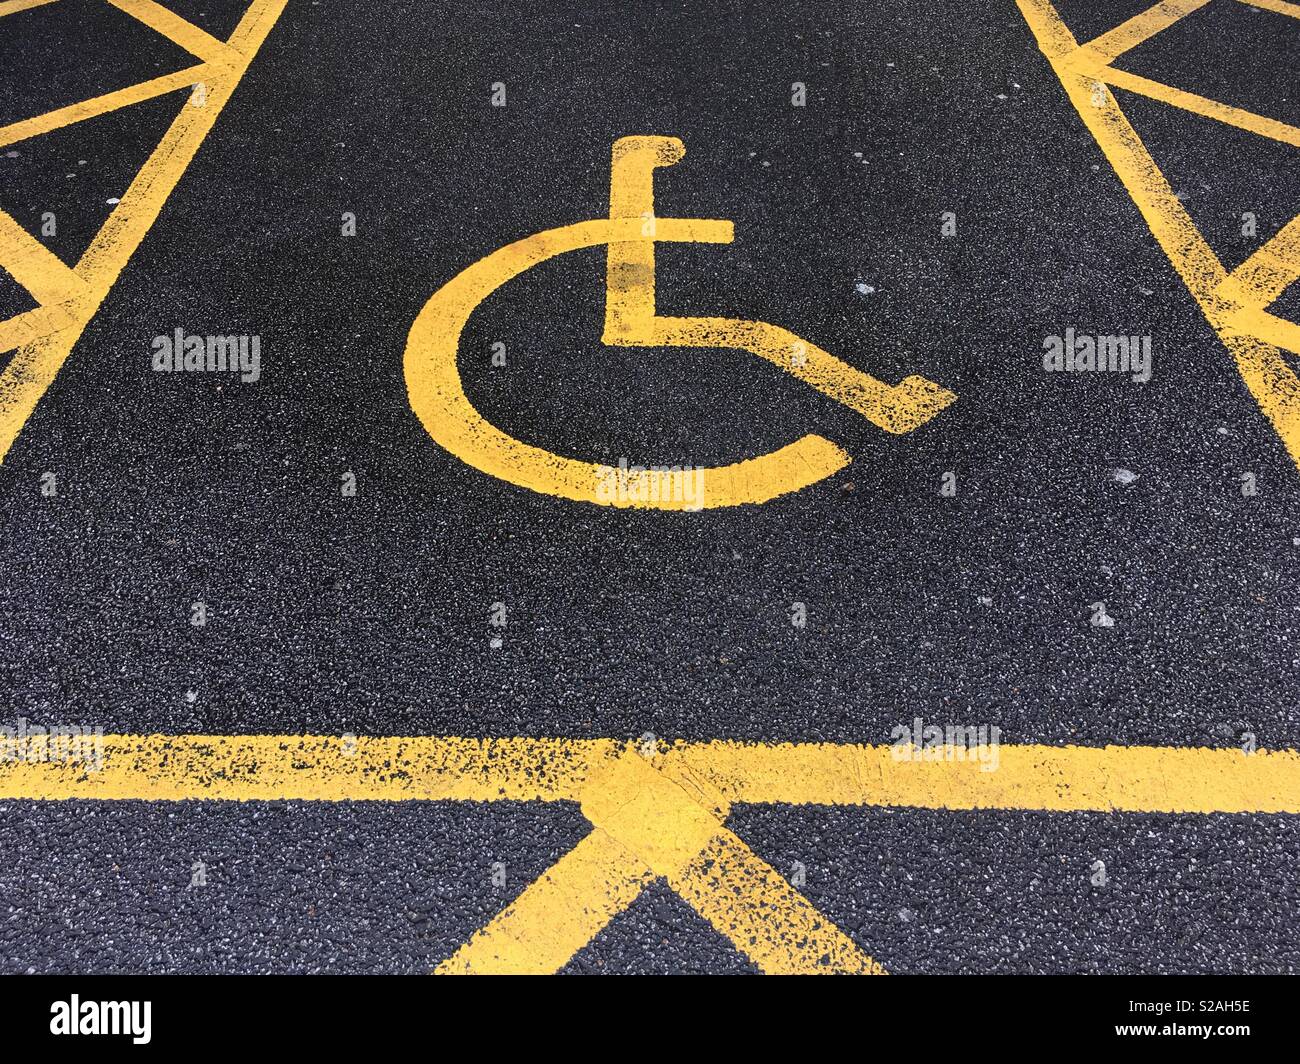 Disabled parking bay markings Stock Photo